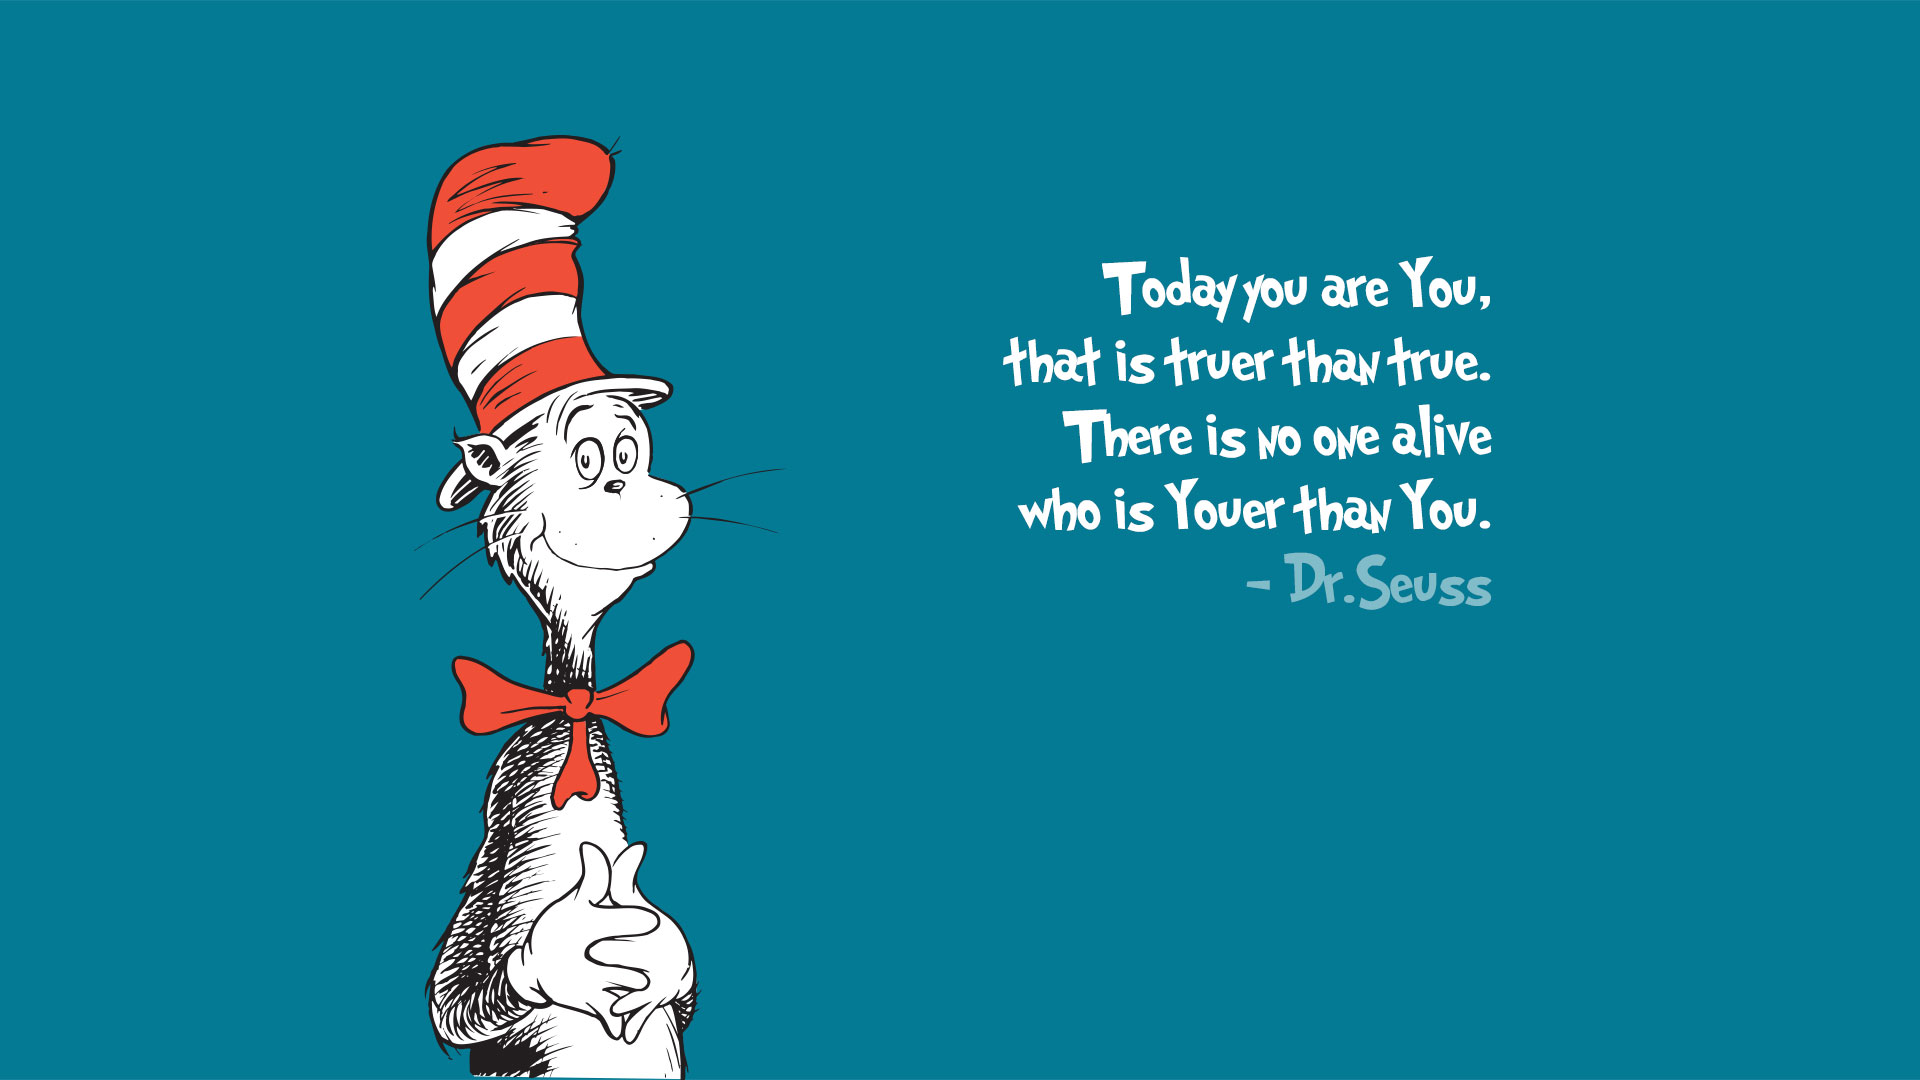 Dr Seuss Quotes Love Images and Pictures  Becuo Art